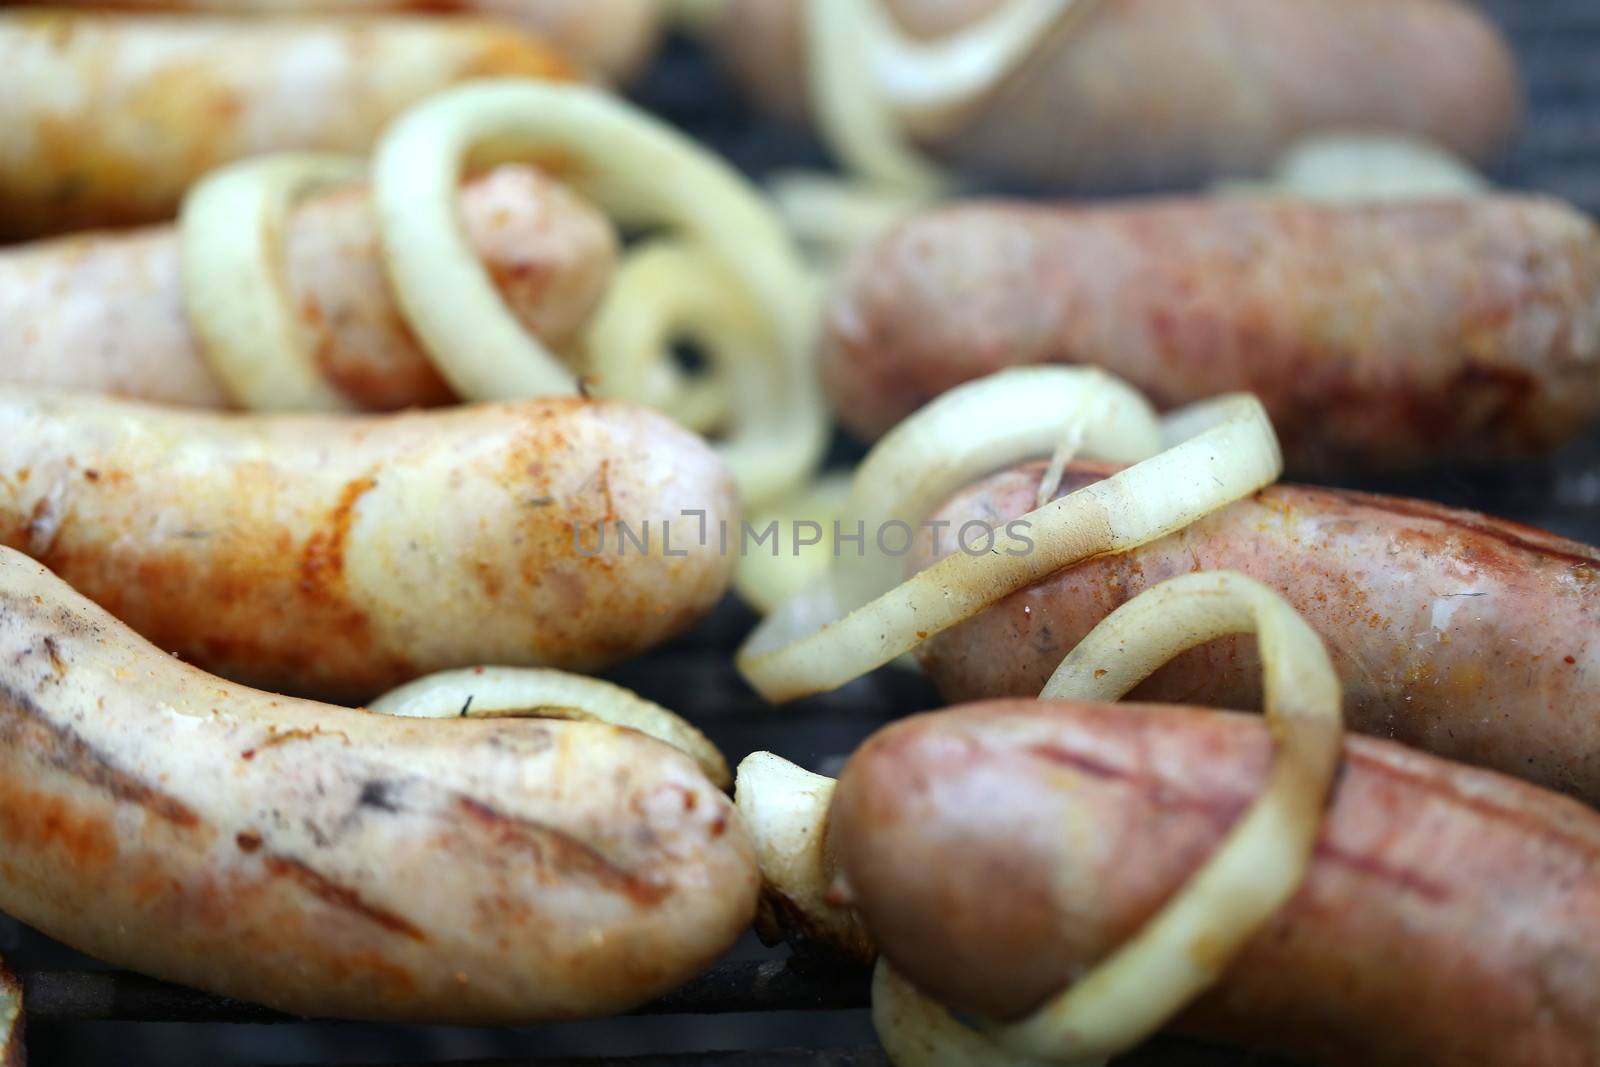 BBQ a lot of sausages with onion by indigolotos